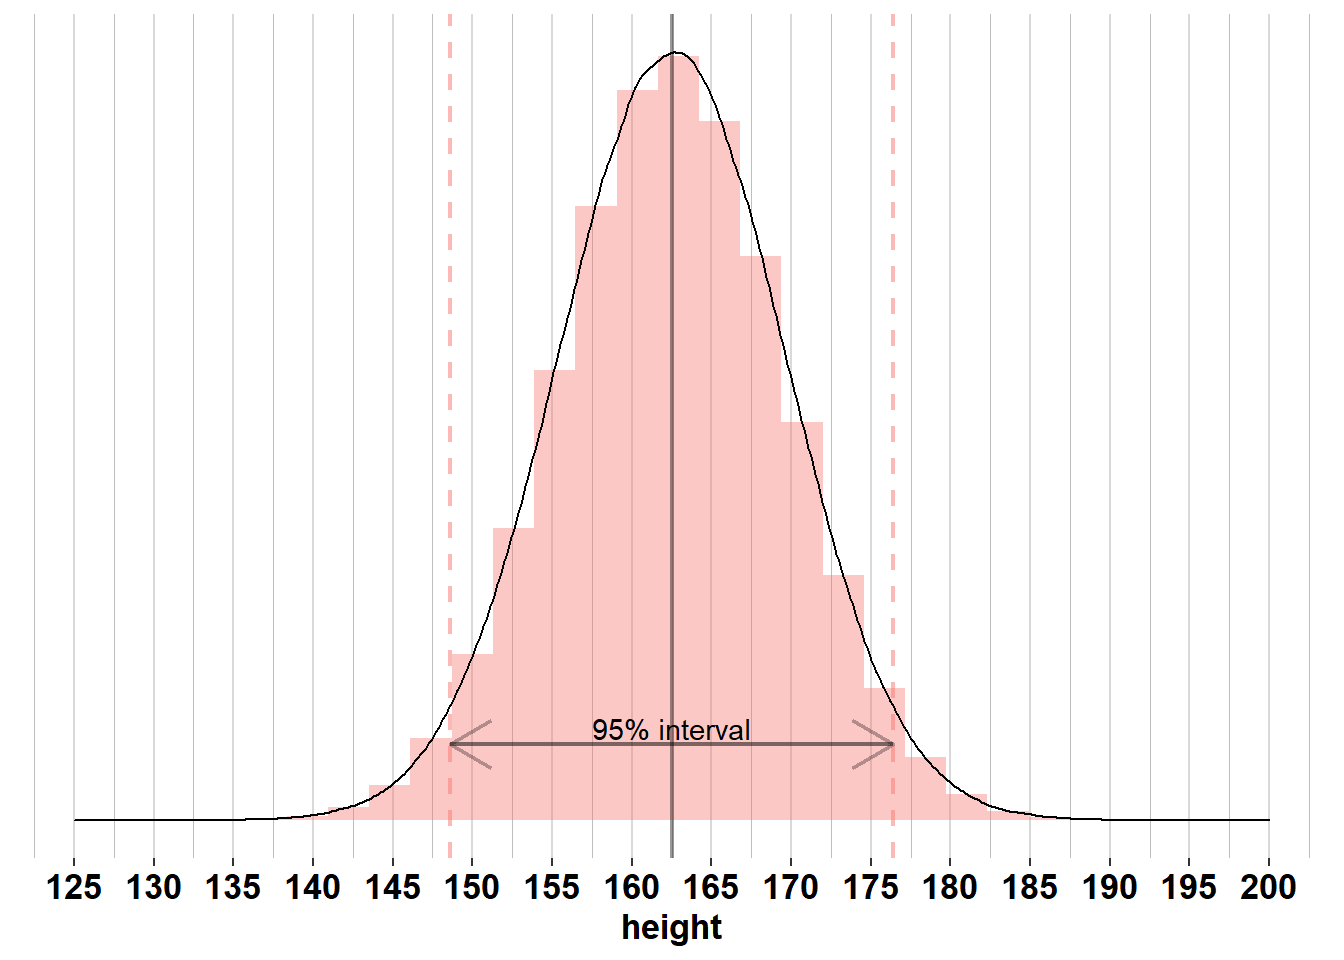 Reference values for height-for age: mean height and standard deviation